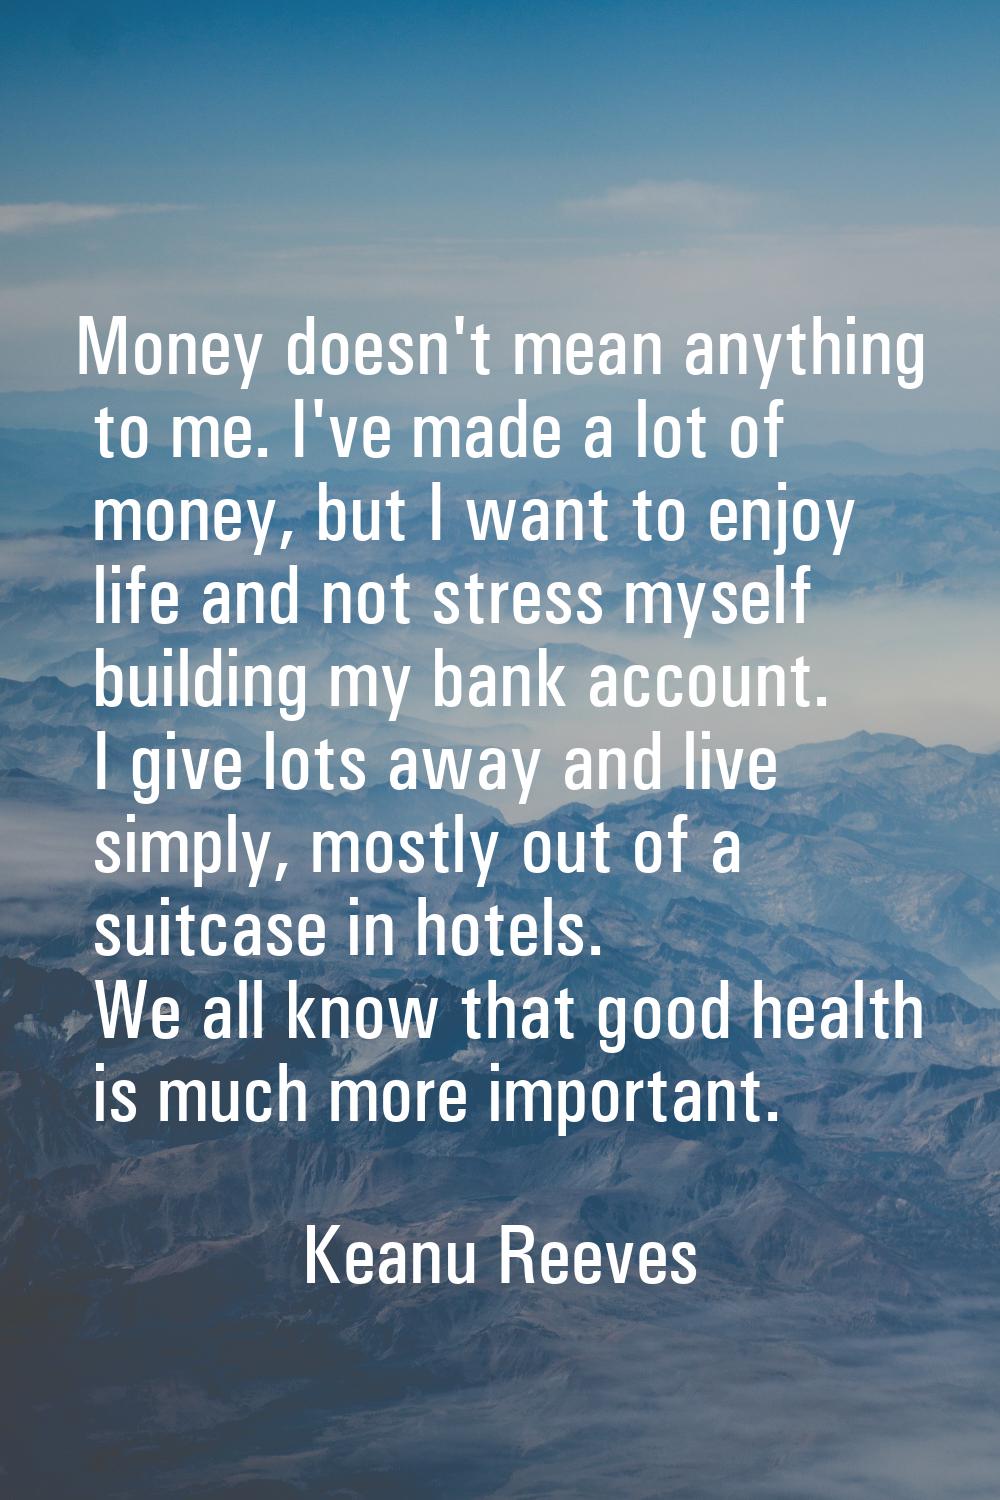 Money doesn't mean anything to me. I've made a lot of money, but I want to enjoy life and not stres